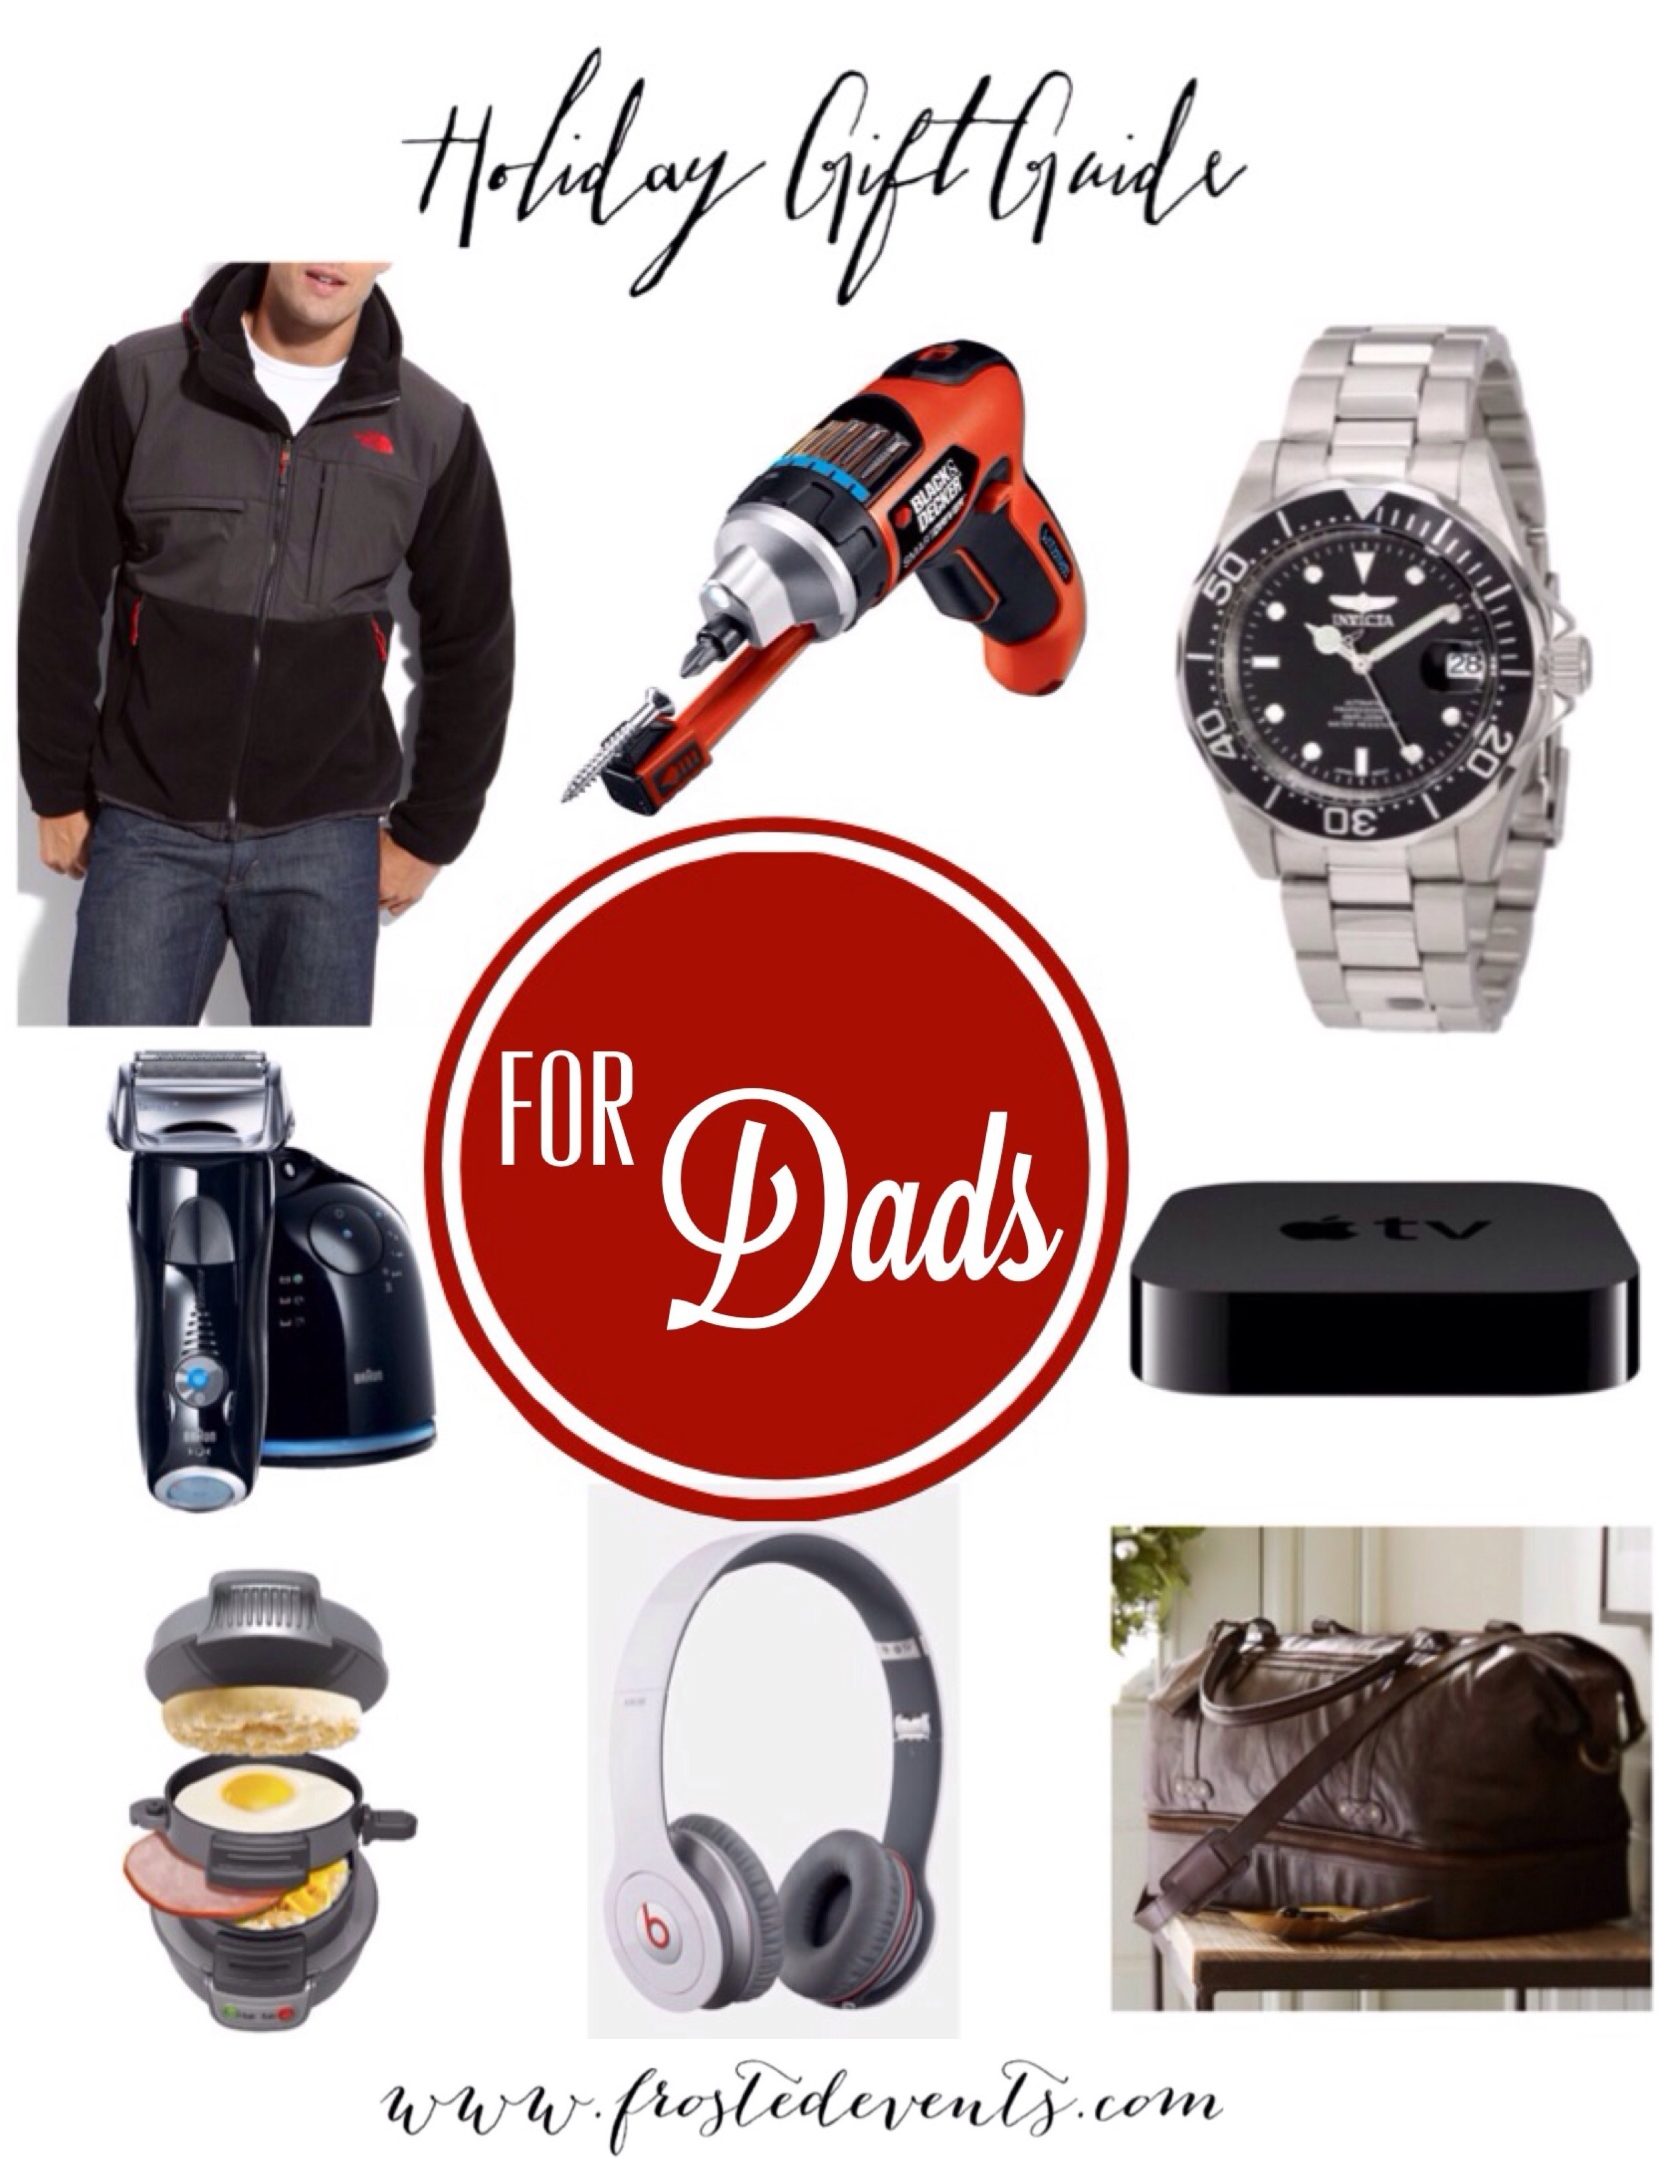 Holiday Gift Guide for Dads www.frostedevents.com Top Christmas Gift Ideas for Fathers